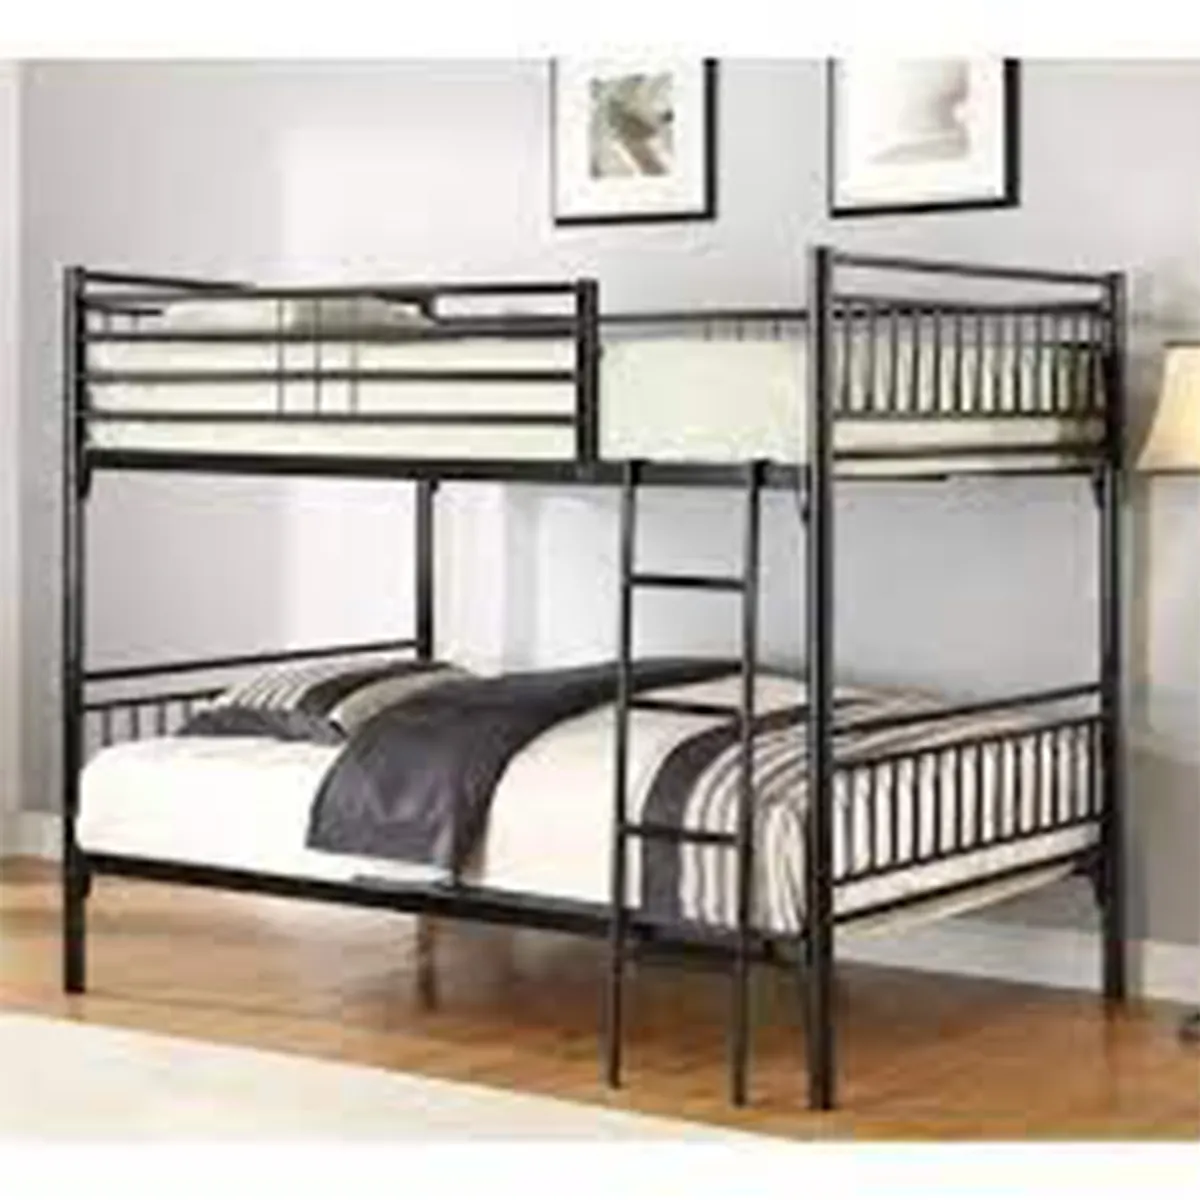 China Supplier Commercial School Dormitory Furniture Bunk Beds, steel double decker beds, all double deck beds design